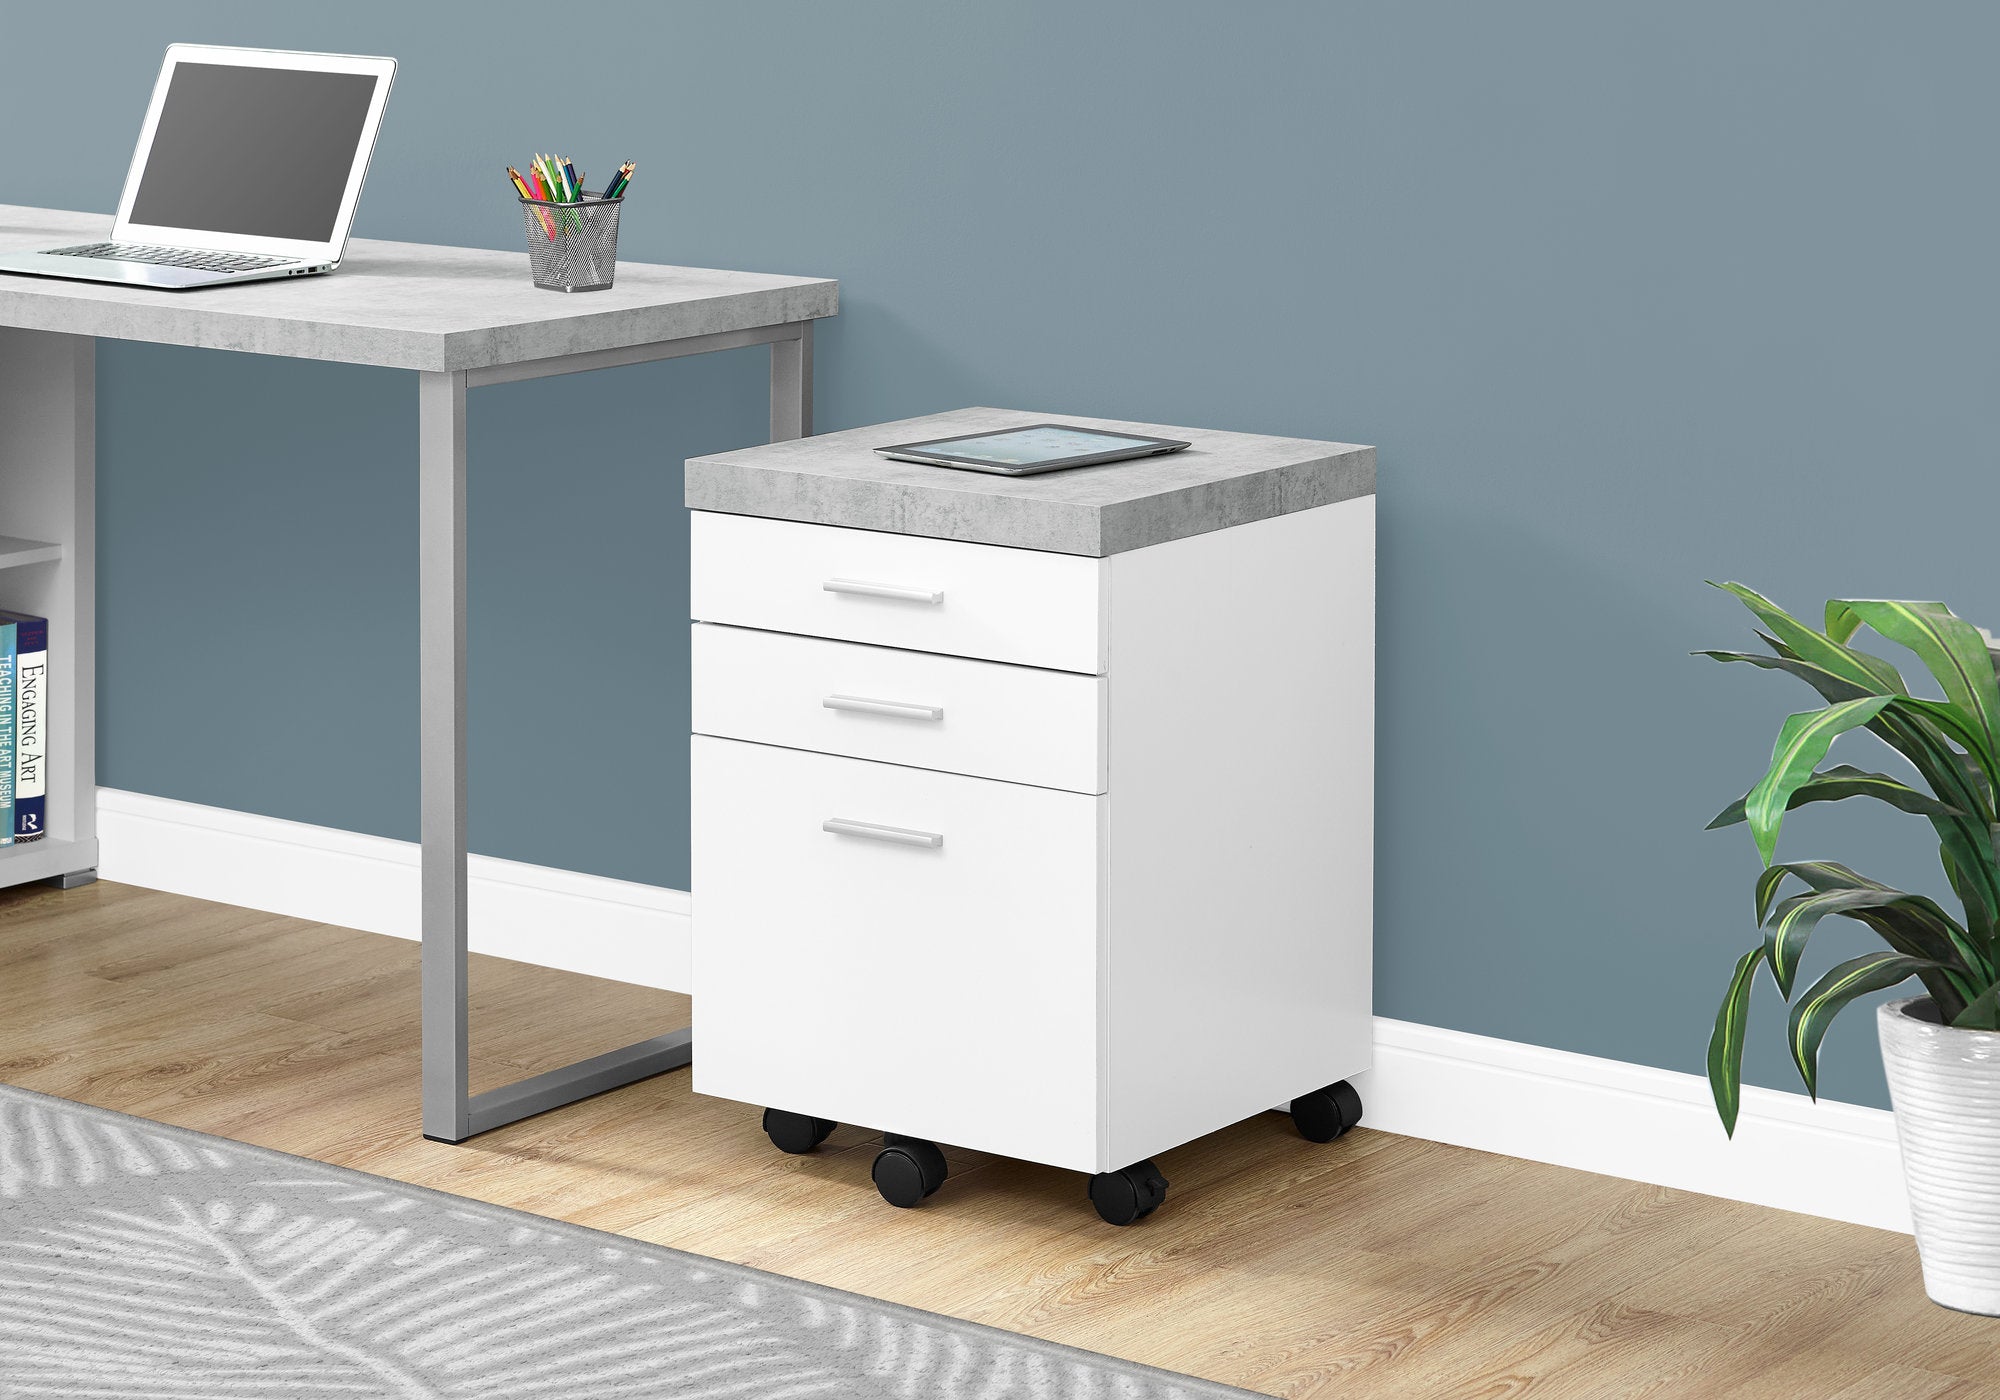 filing cabinet 3 drawer white cement look on castor i7051